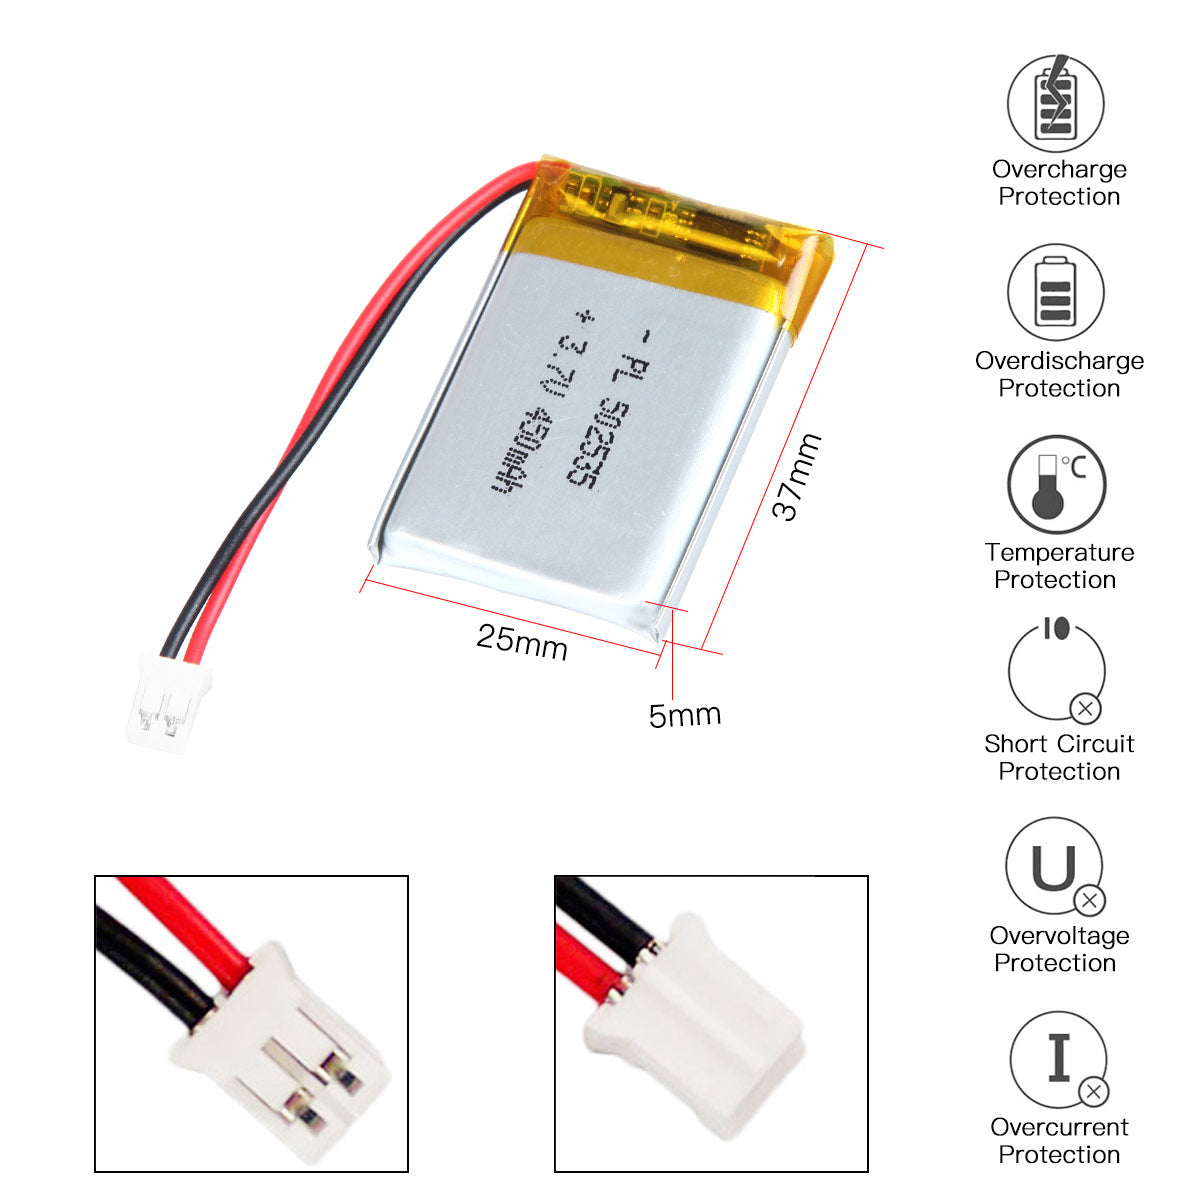 YDL 3.7V 450mAh 502535 Rechargeable Lipo Battery JST Connector - YDL Battery